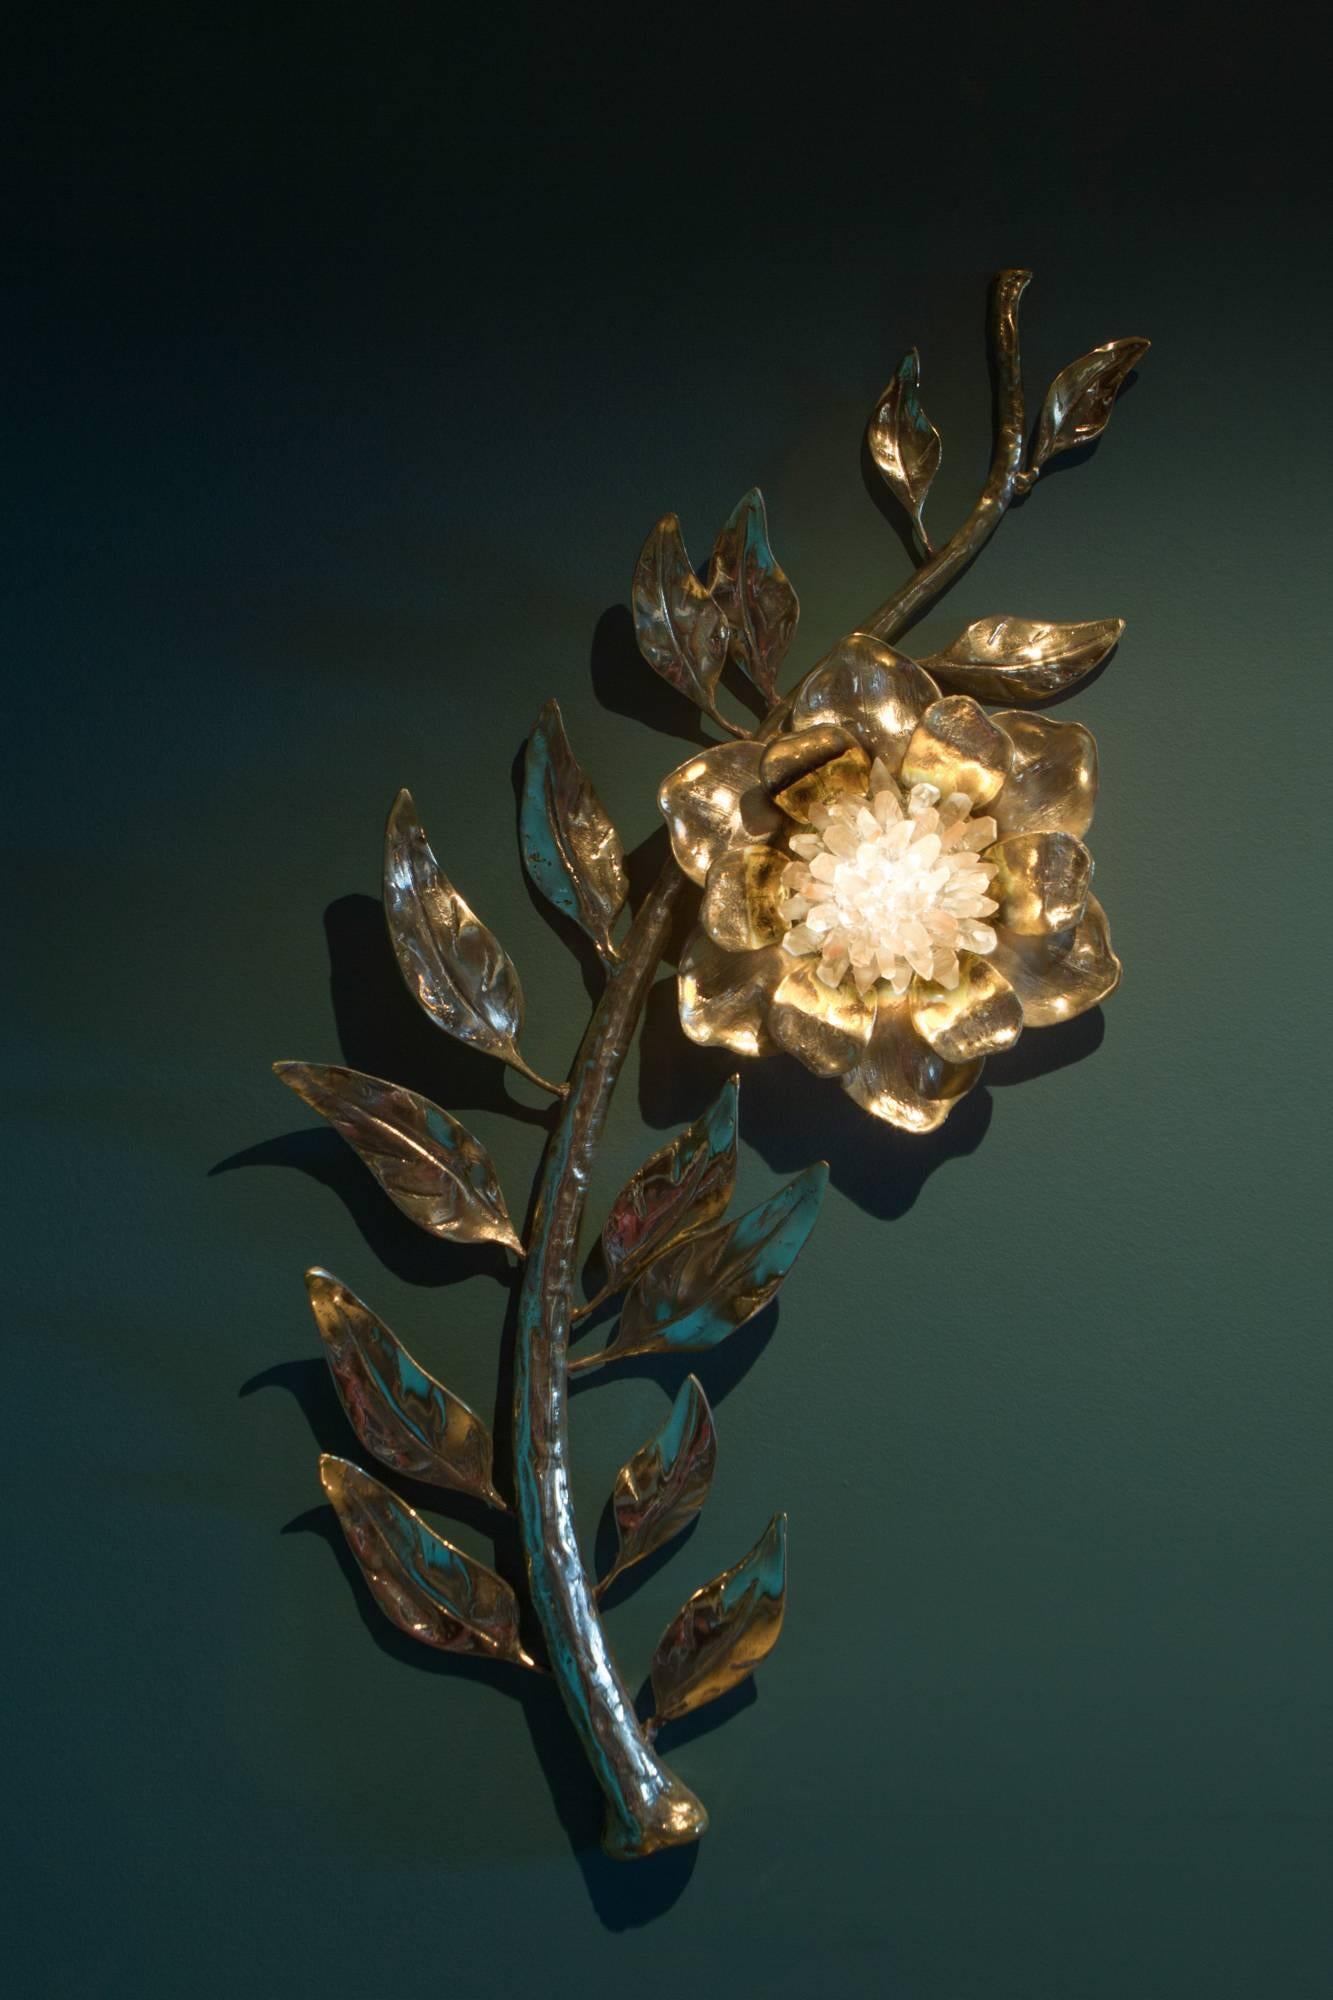 Contemporary Pure Rock Crystal Sconce, “Bay Flower, ” Demian Quincke